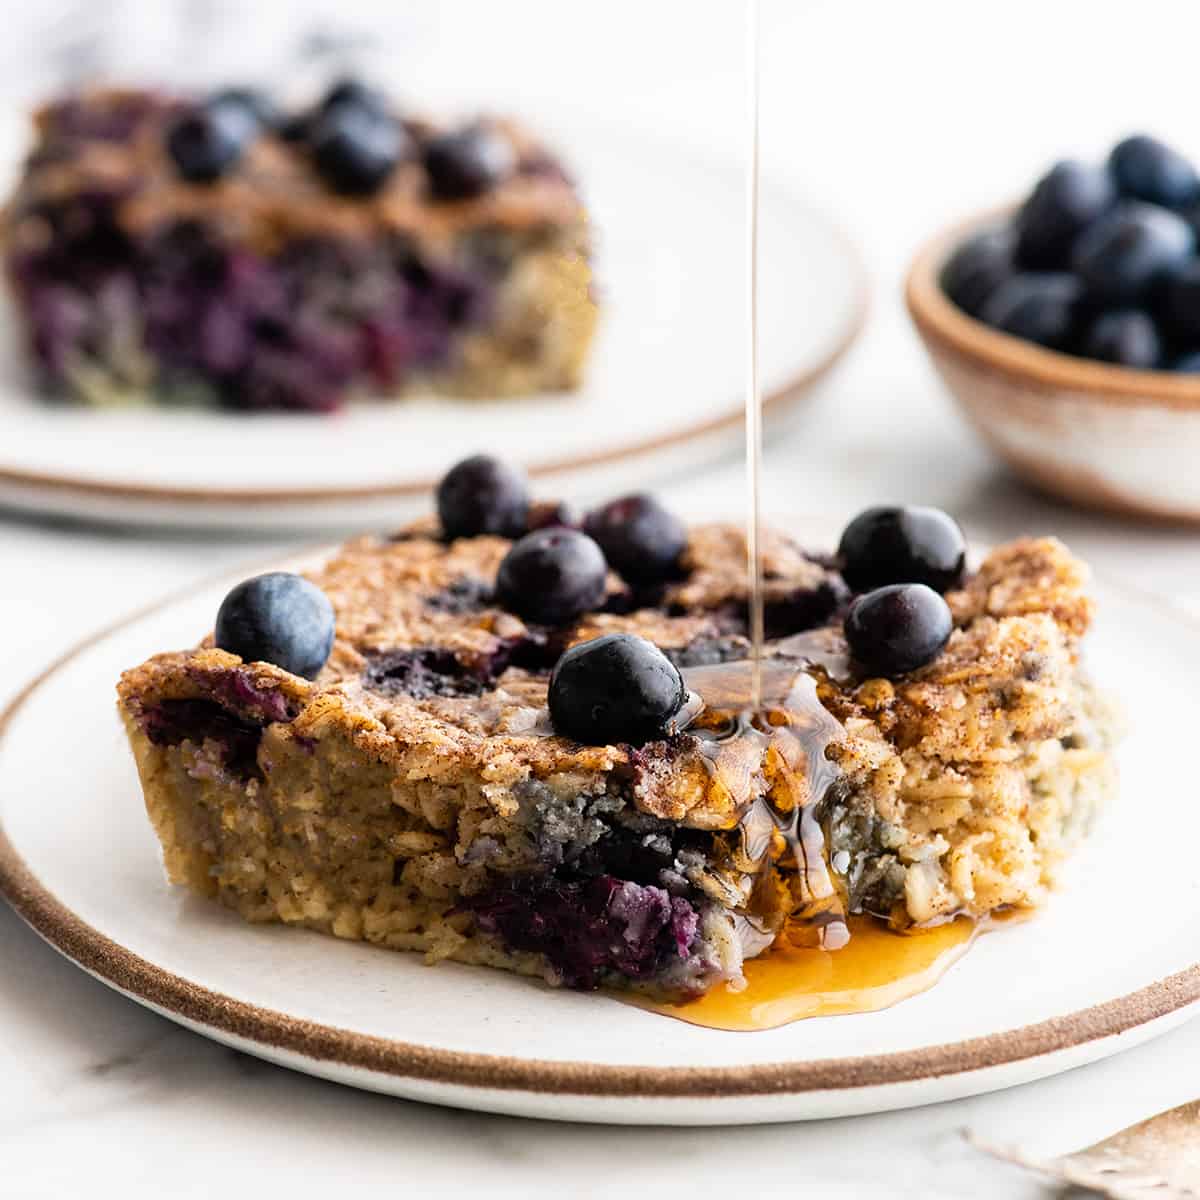 front view of syrup being poured onto a piece of Blueberry Baked Oatmeal on a plate